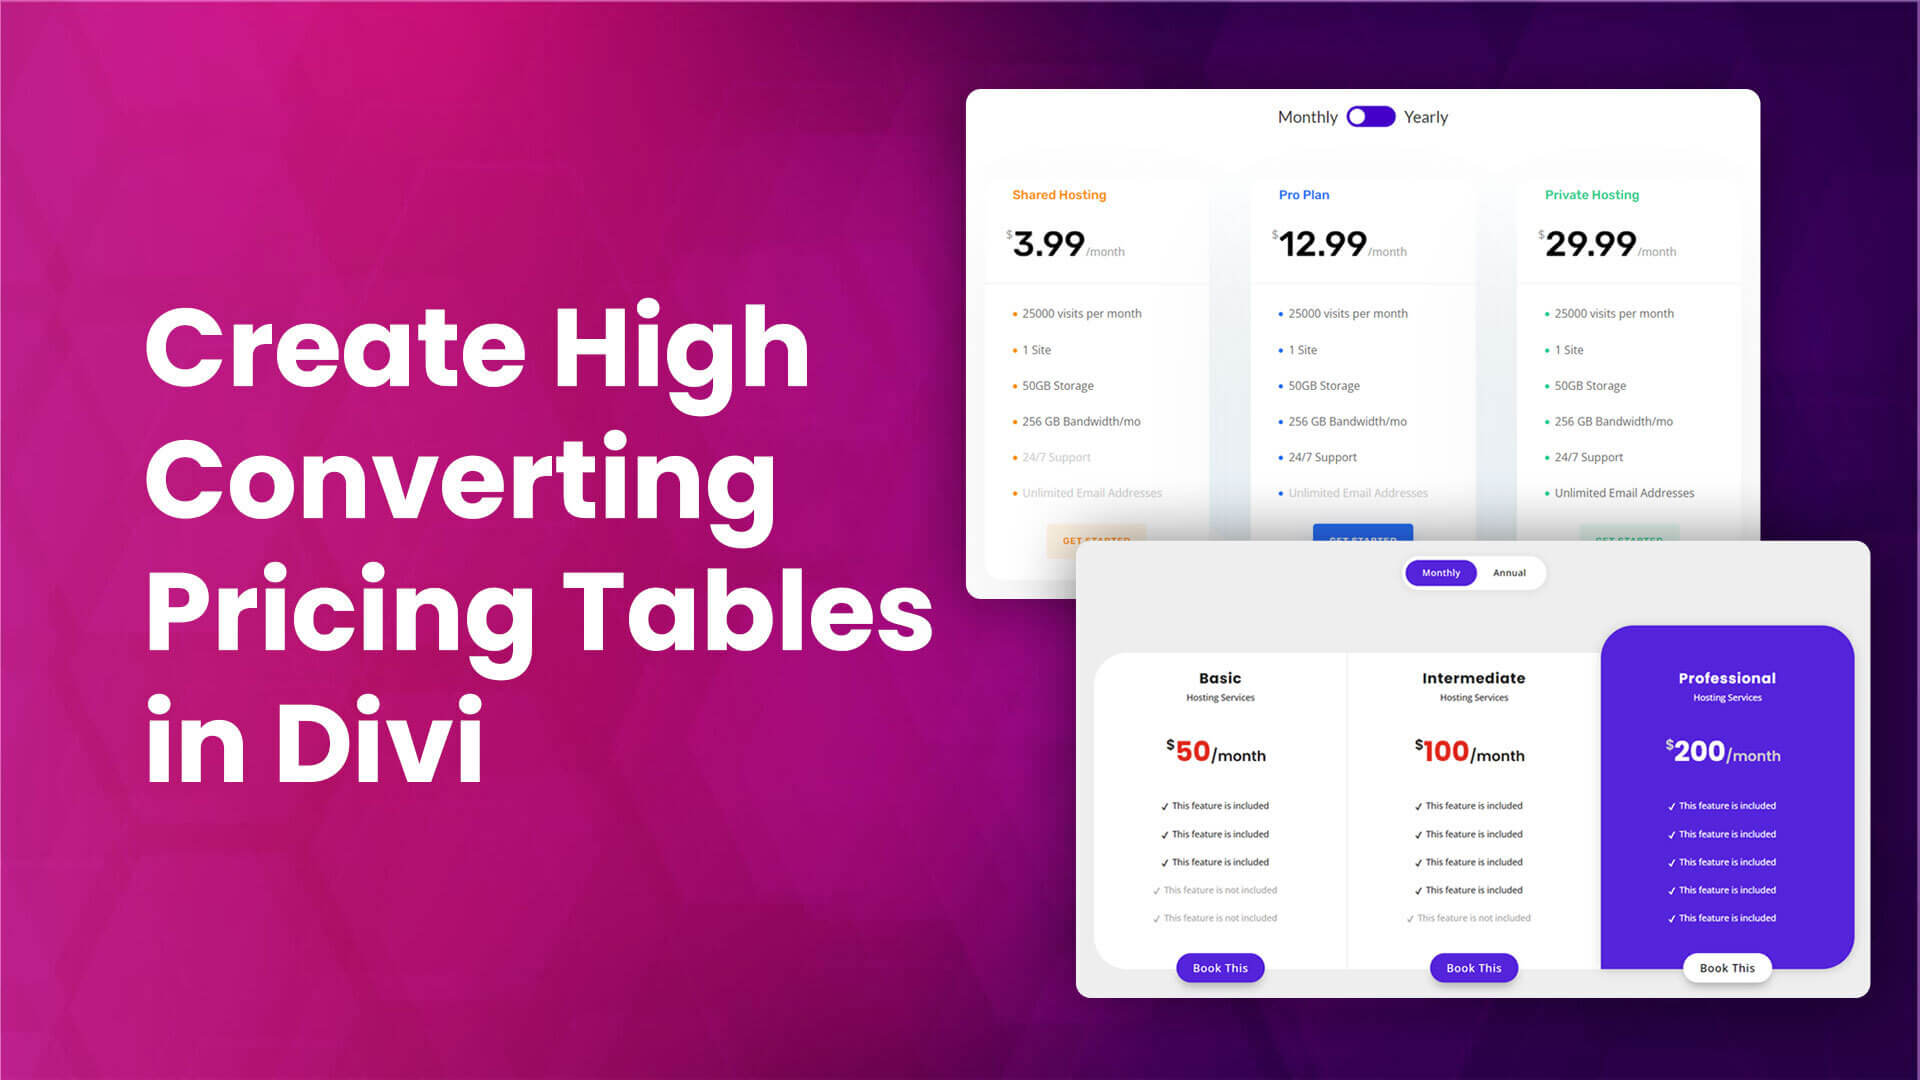 Best Practices to Create High Converting Pricing Tables in Divi